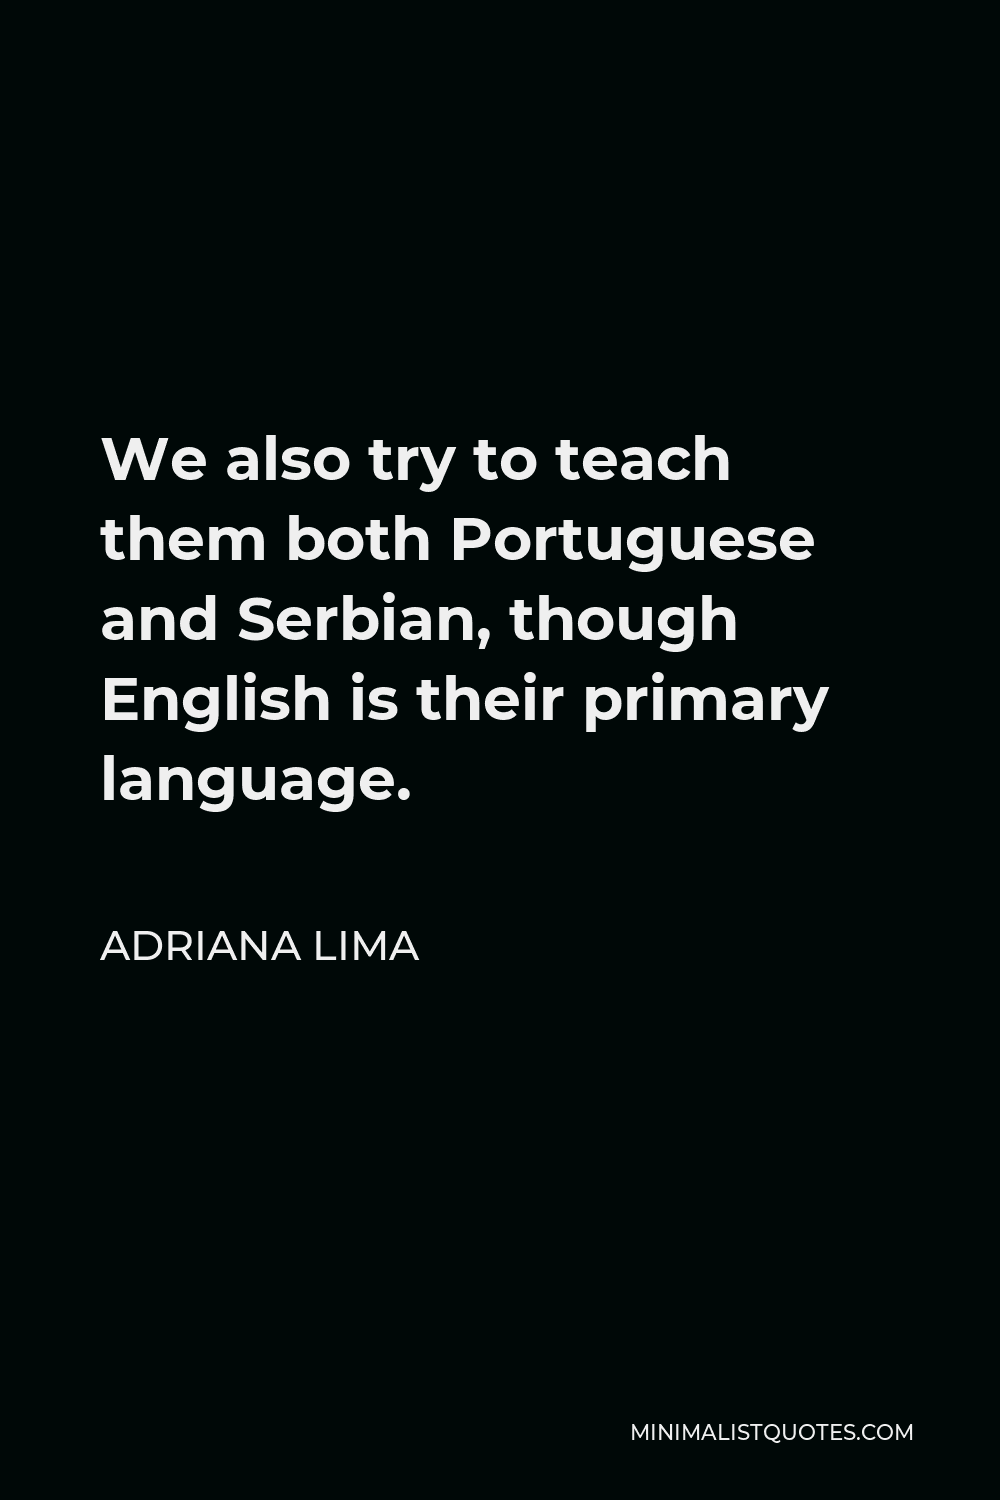 Adriana Lima Quote - We also try to teach them both Portuguese and Serbian, though English is their primary language.